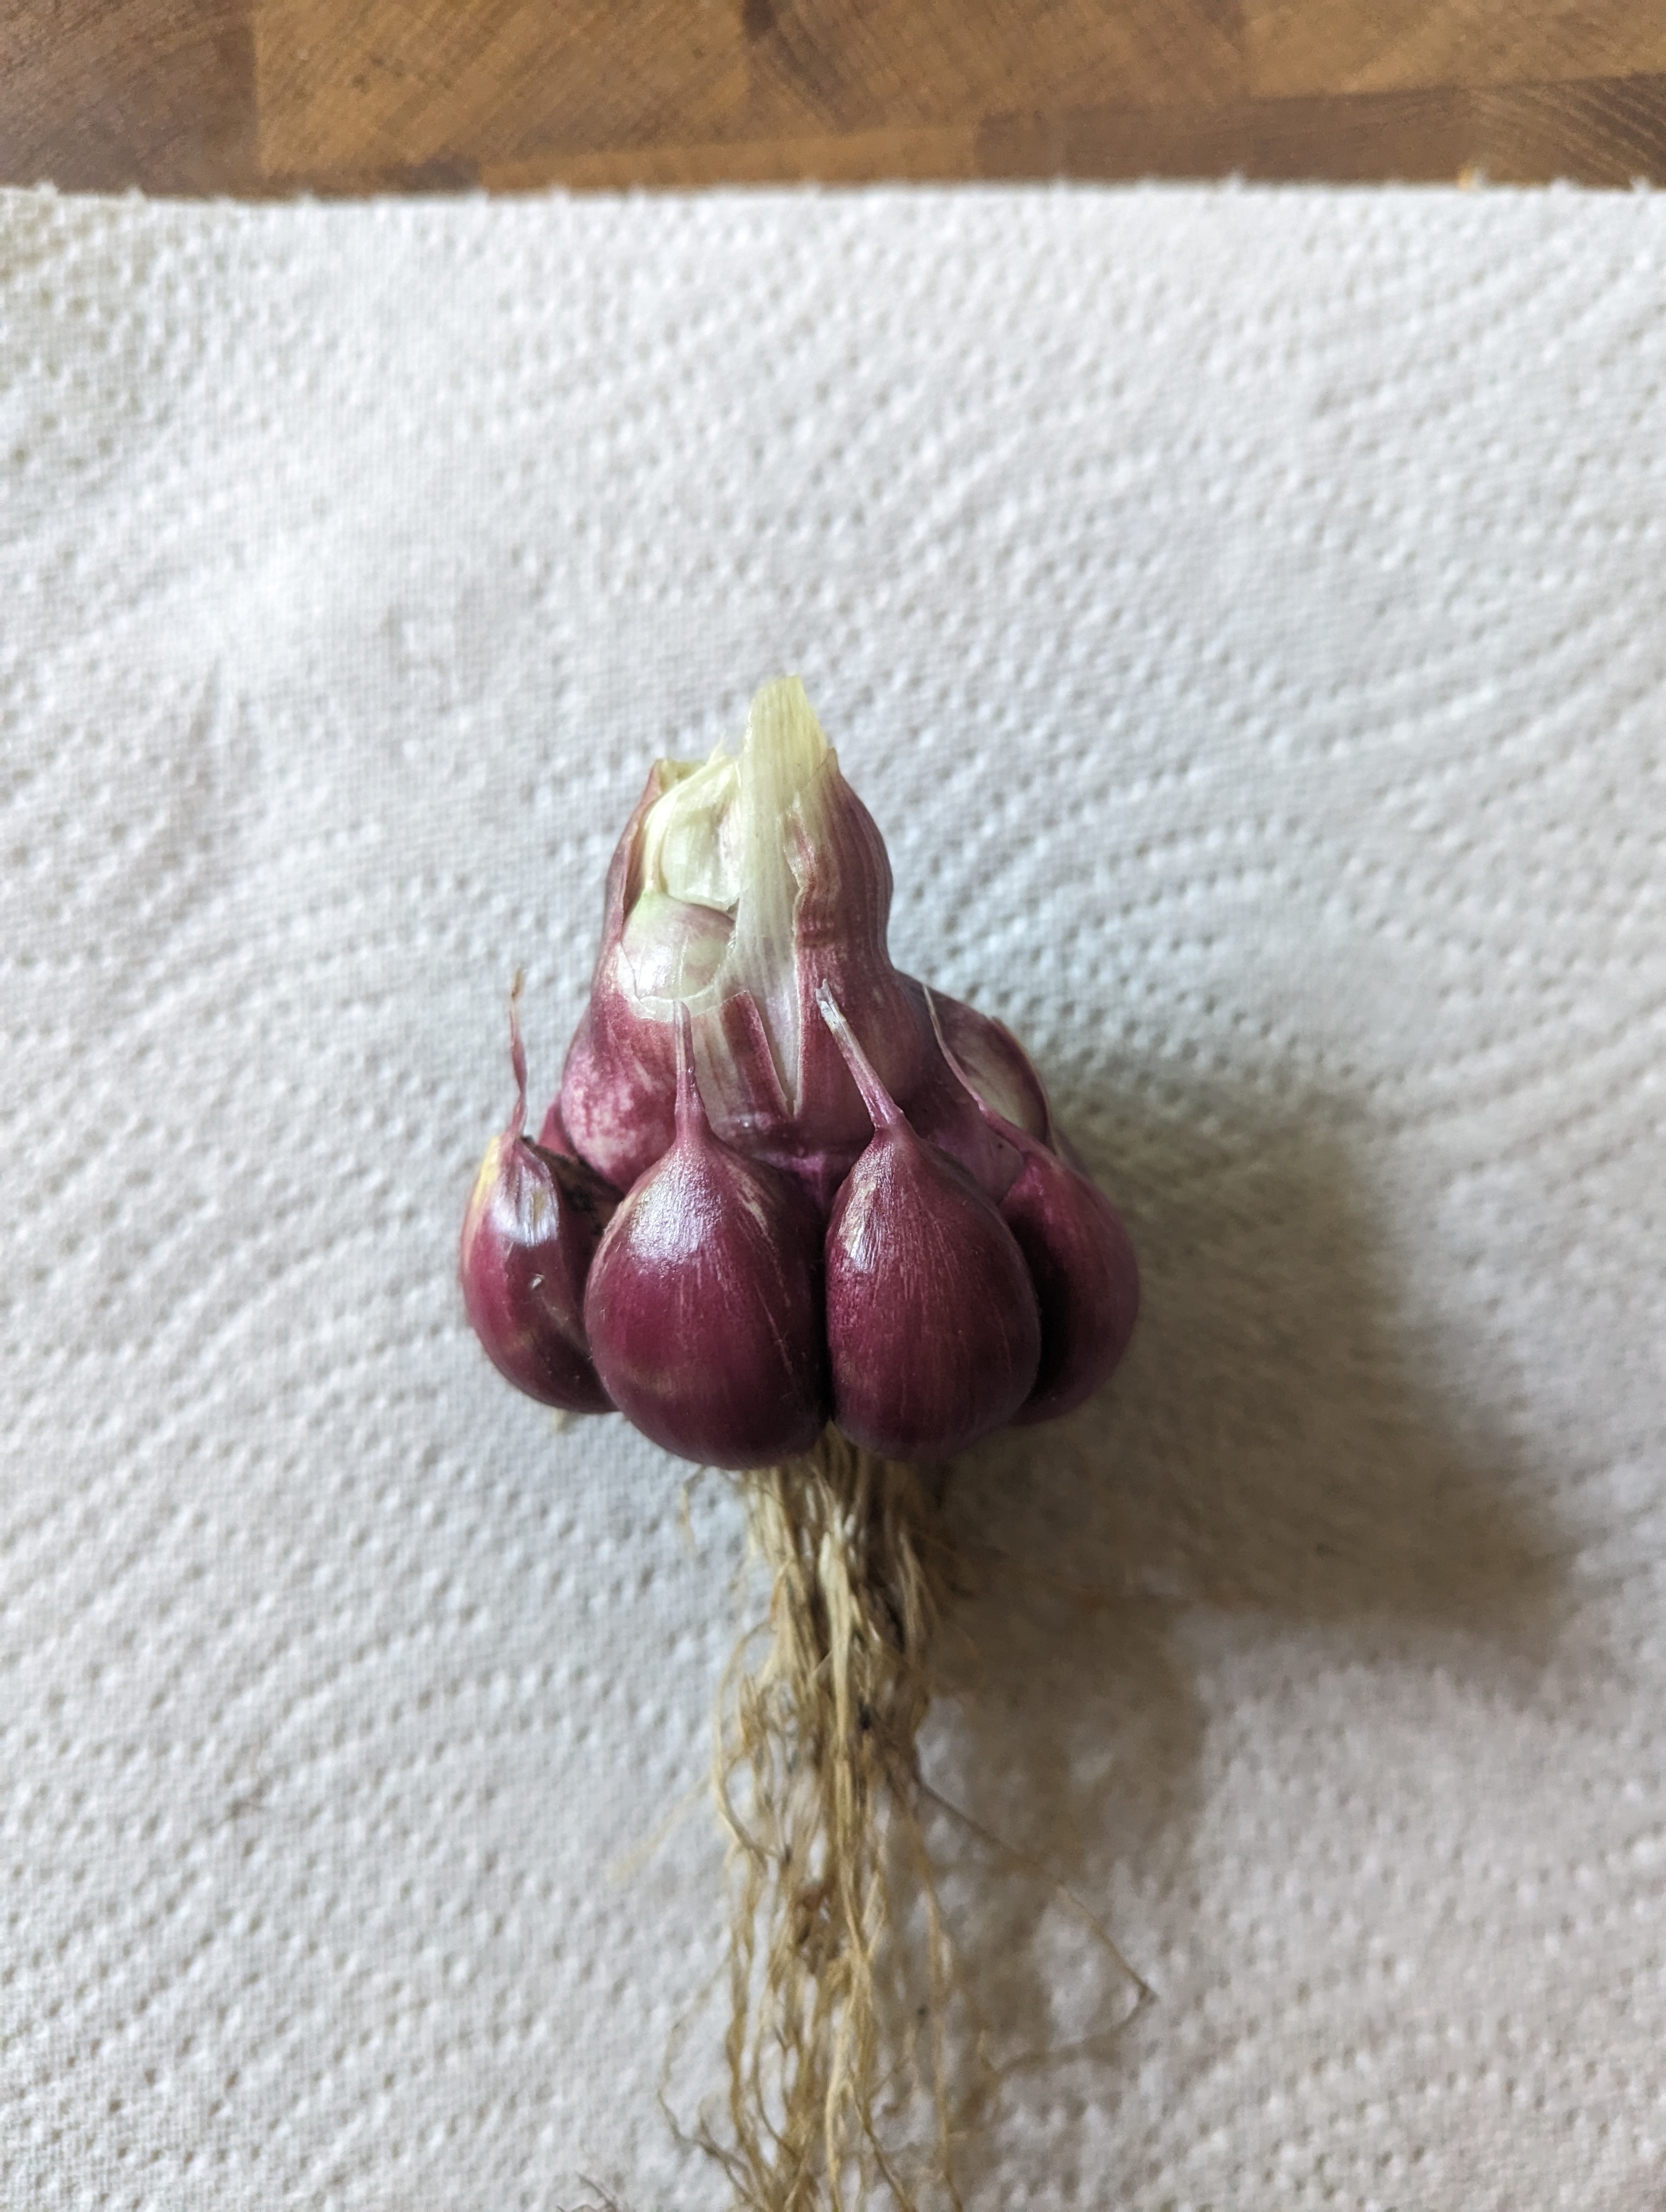 A large but very wonky bulb of garlic.